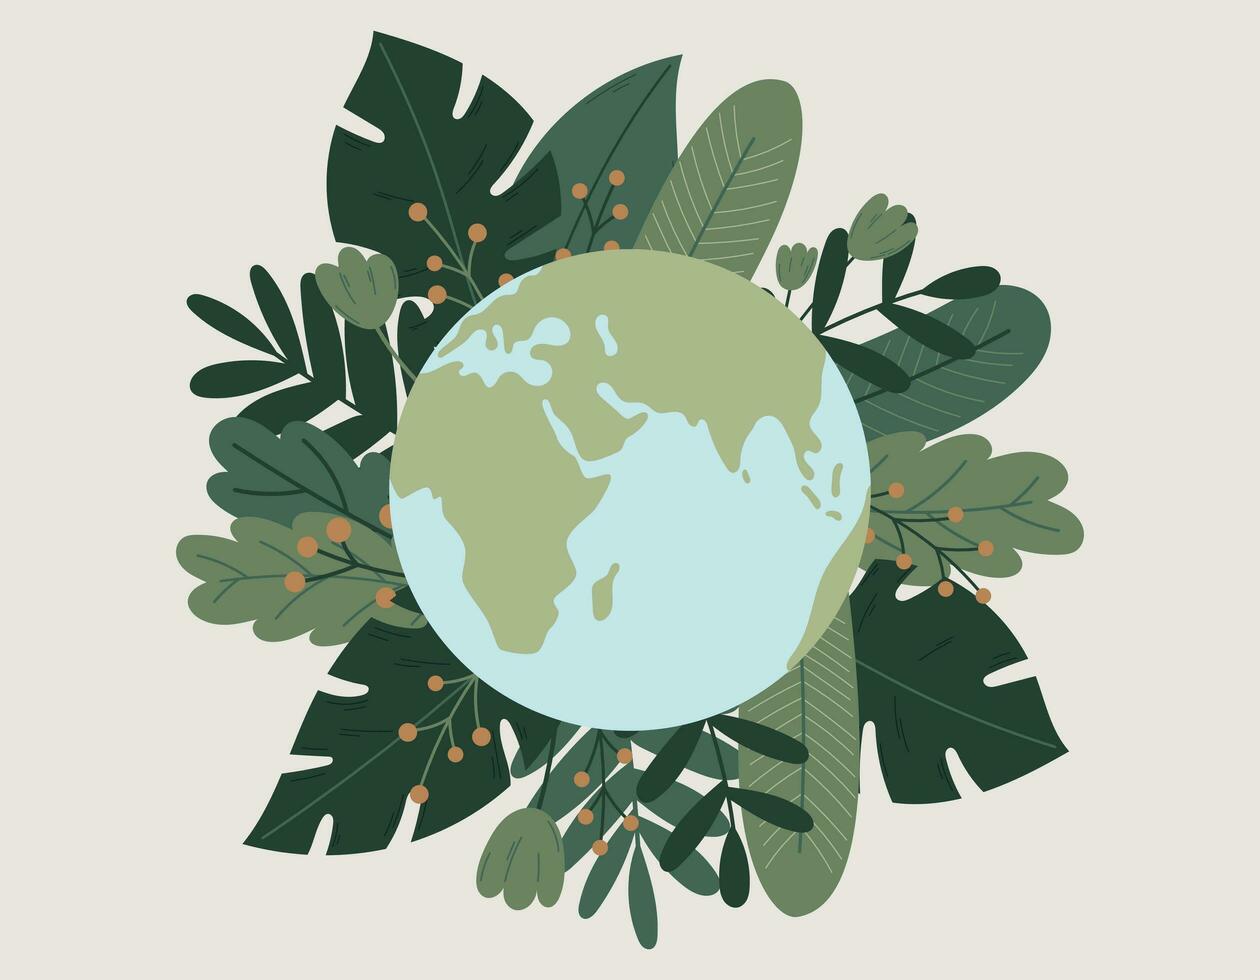 Planet Earth with a frame of tropical green leaves. Globe vector isolated flat illustration. The concept of saving nature